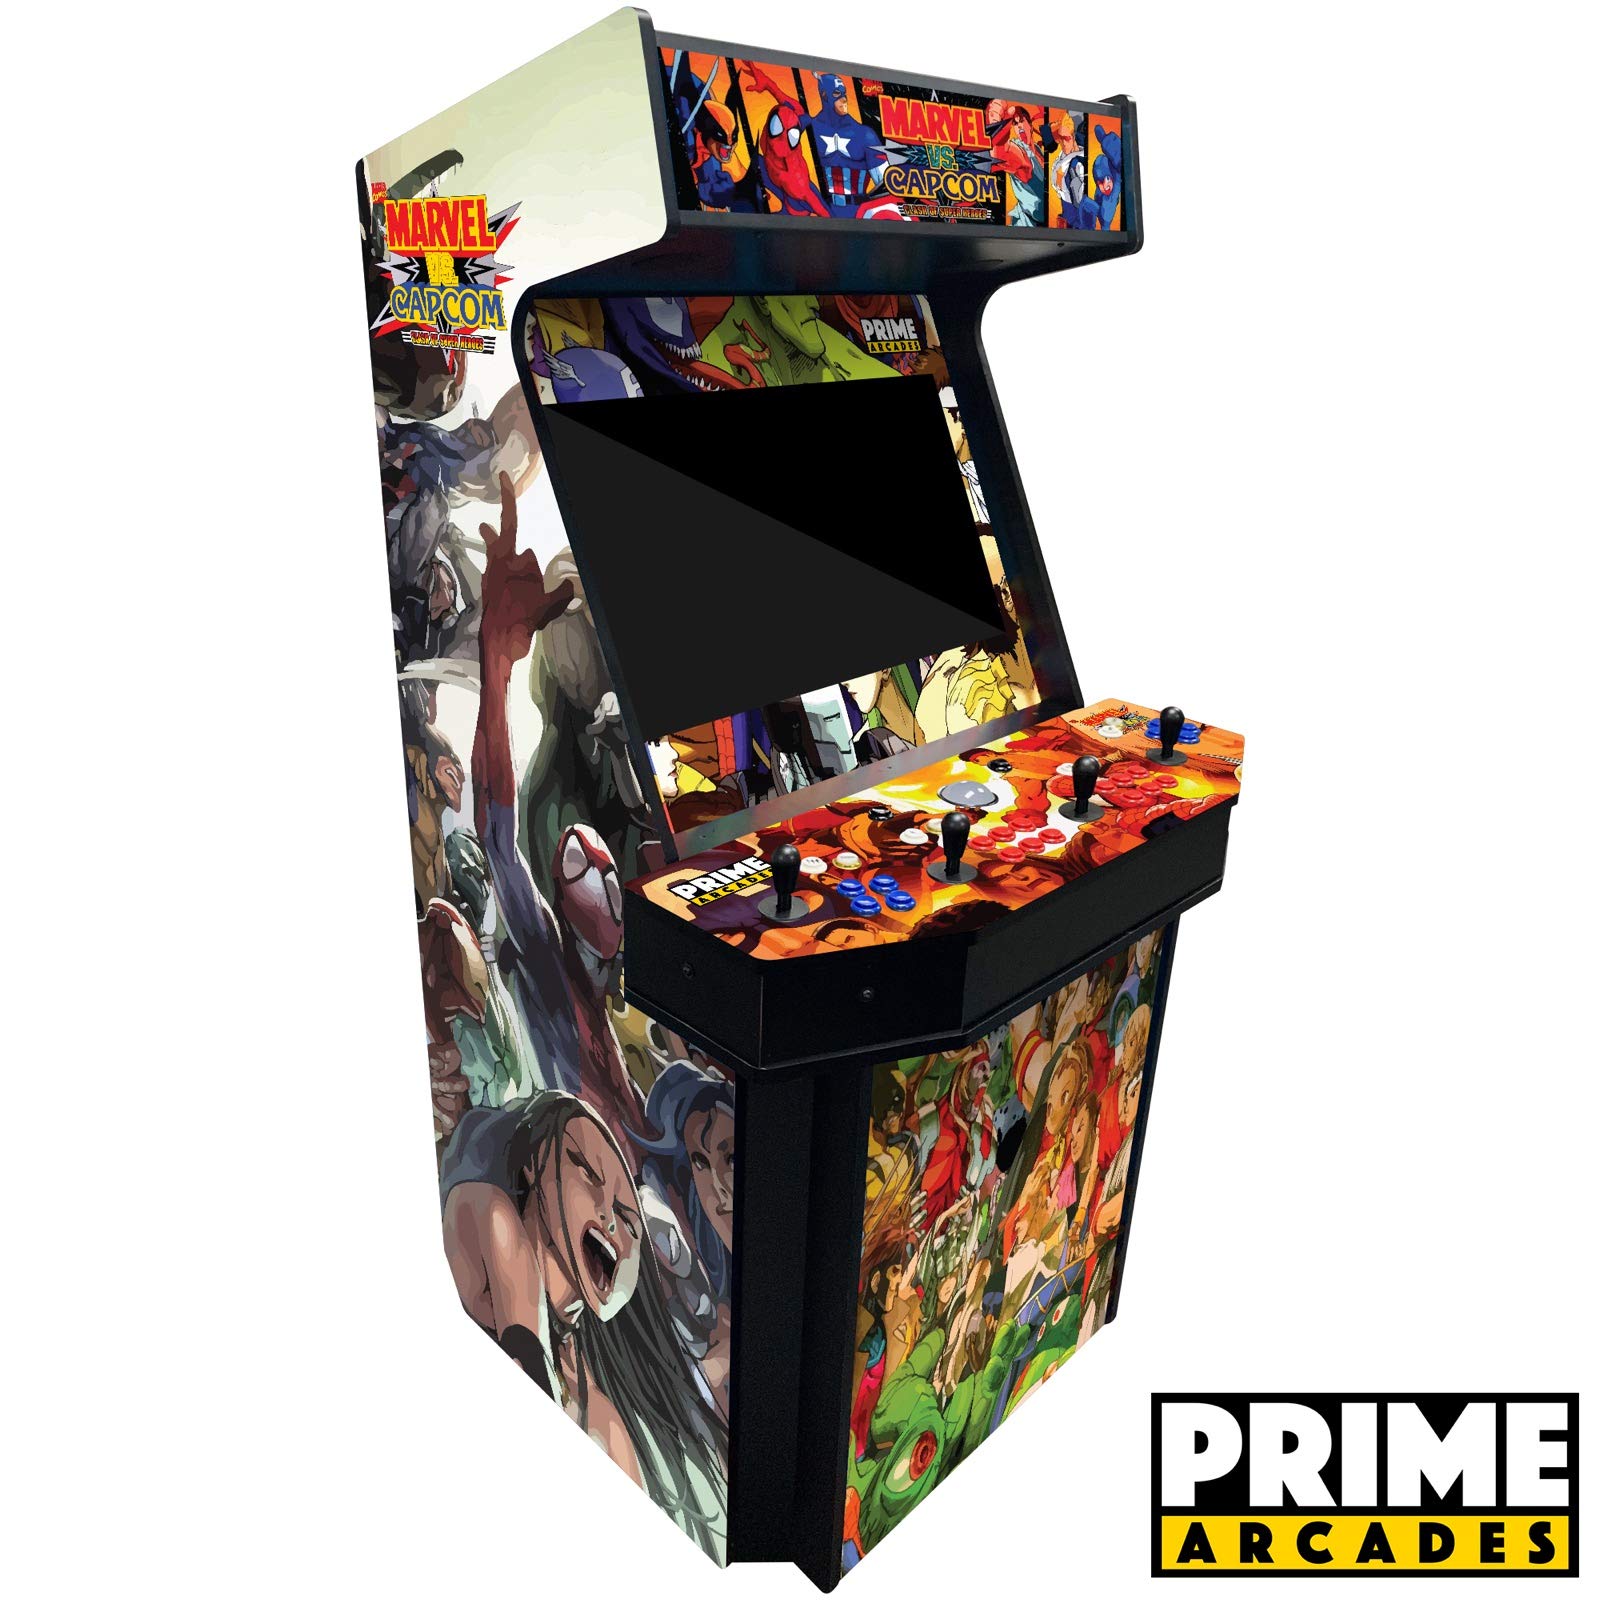 4 Player Upright Arcade Machine with 4,708 Games in 1 32